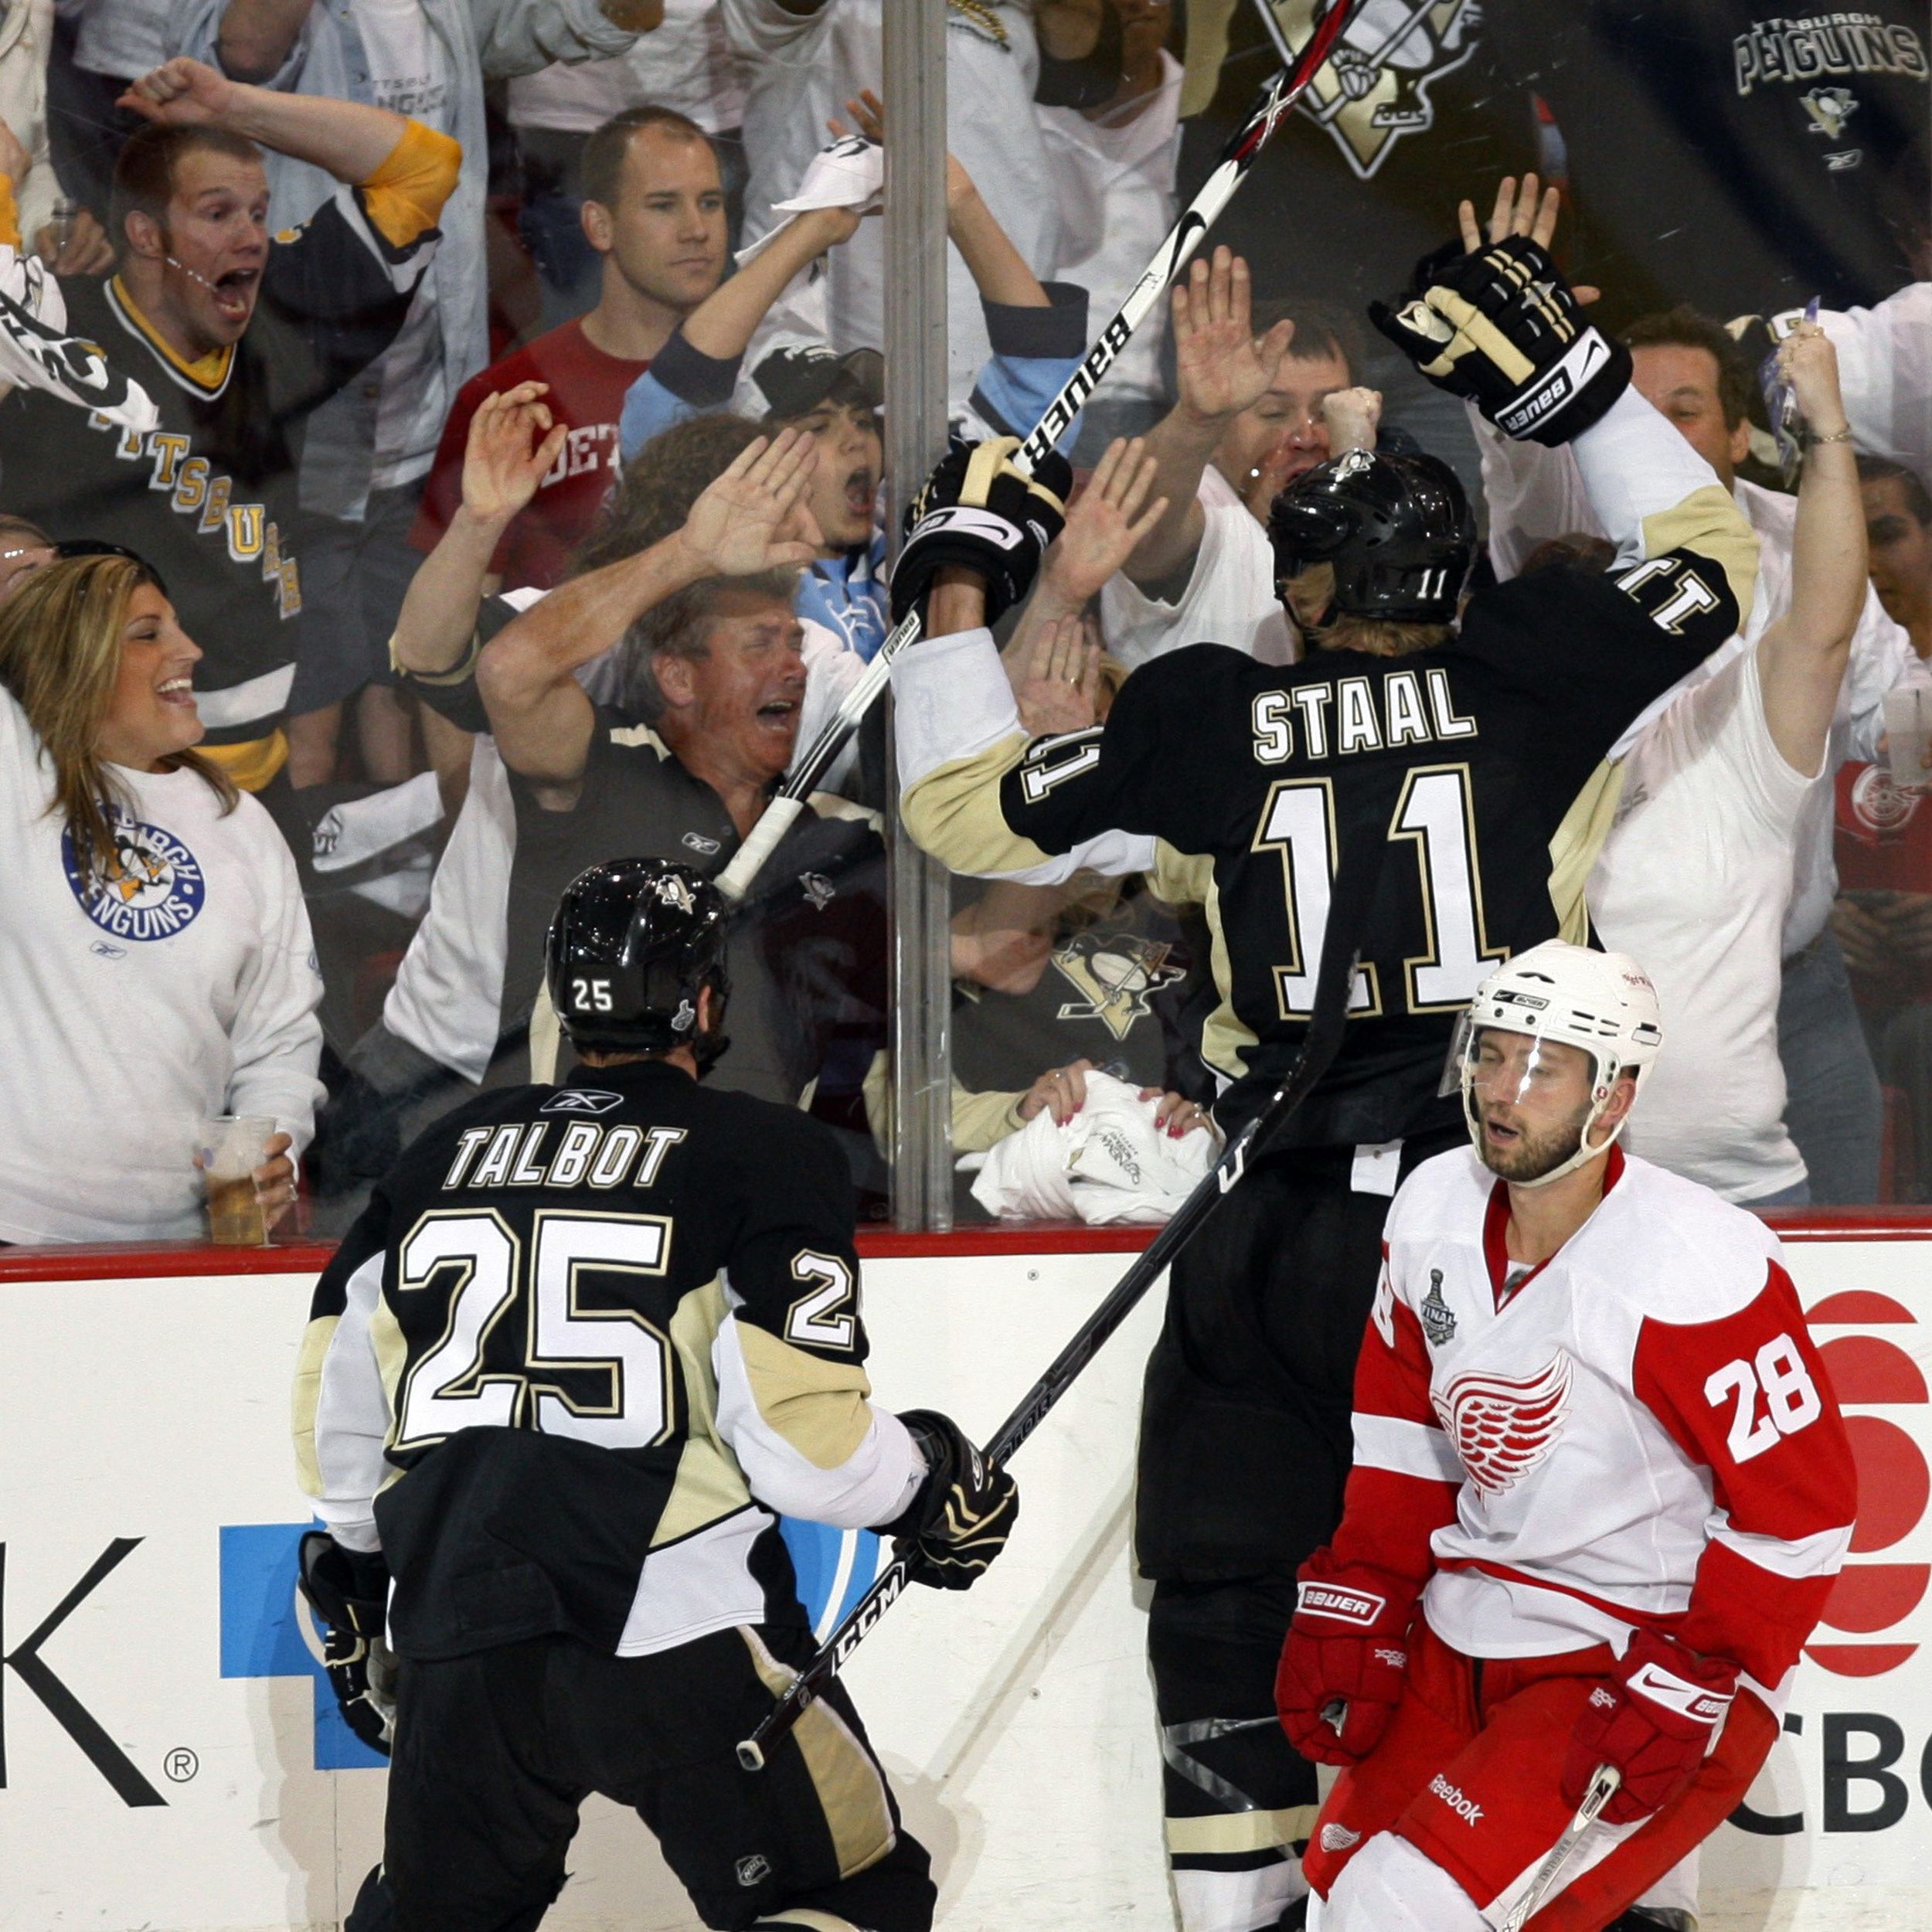 It's the 2009 Stanley Cup Final. - Pittsburgh Penguins